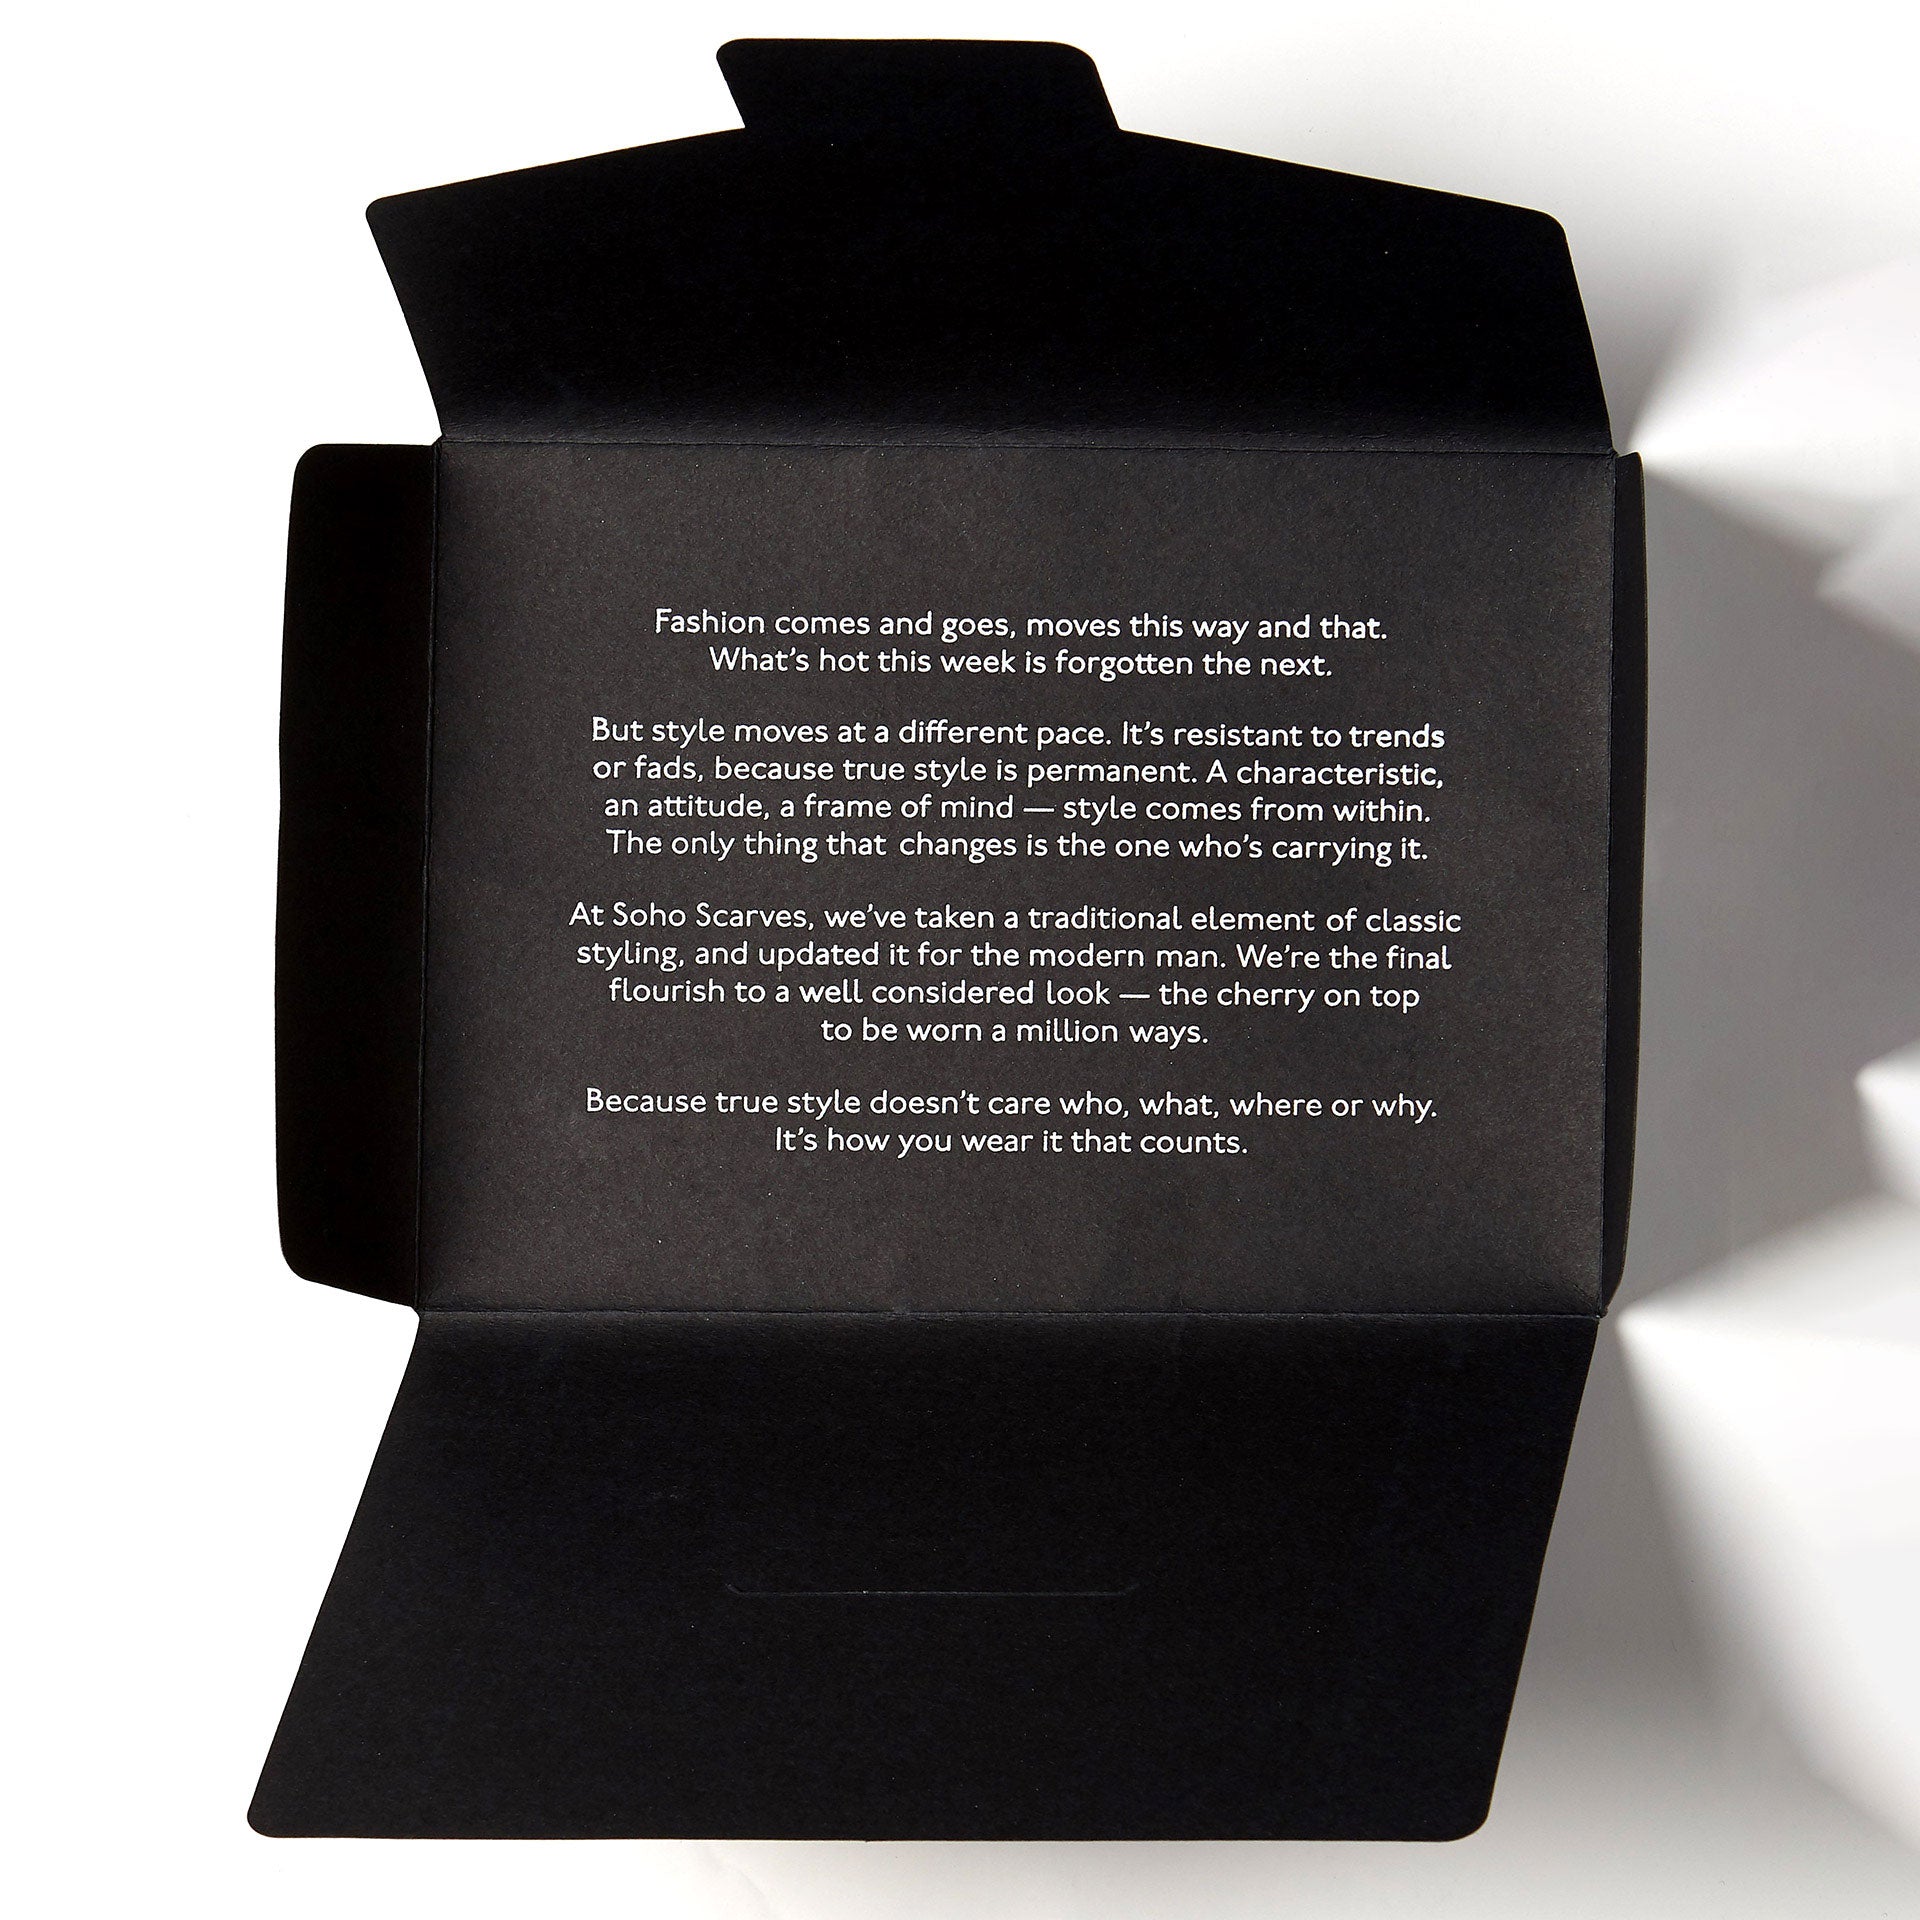 Opened black packaging for wide bohemian scarf from Soho Scarves, containing style manifesto.